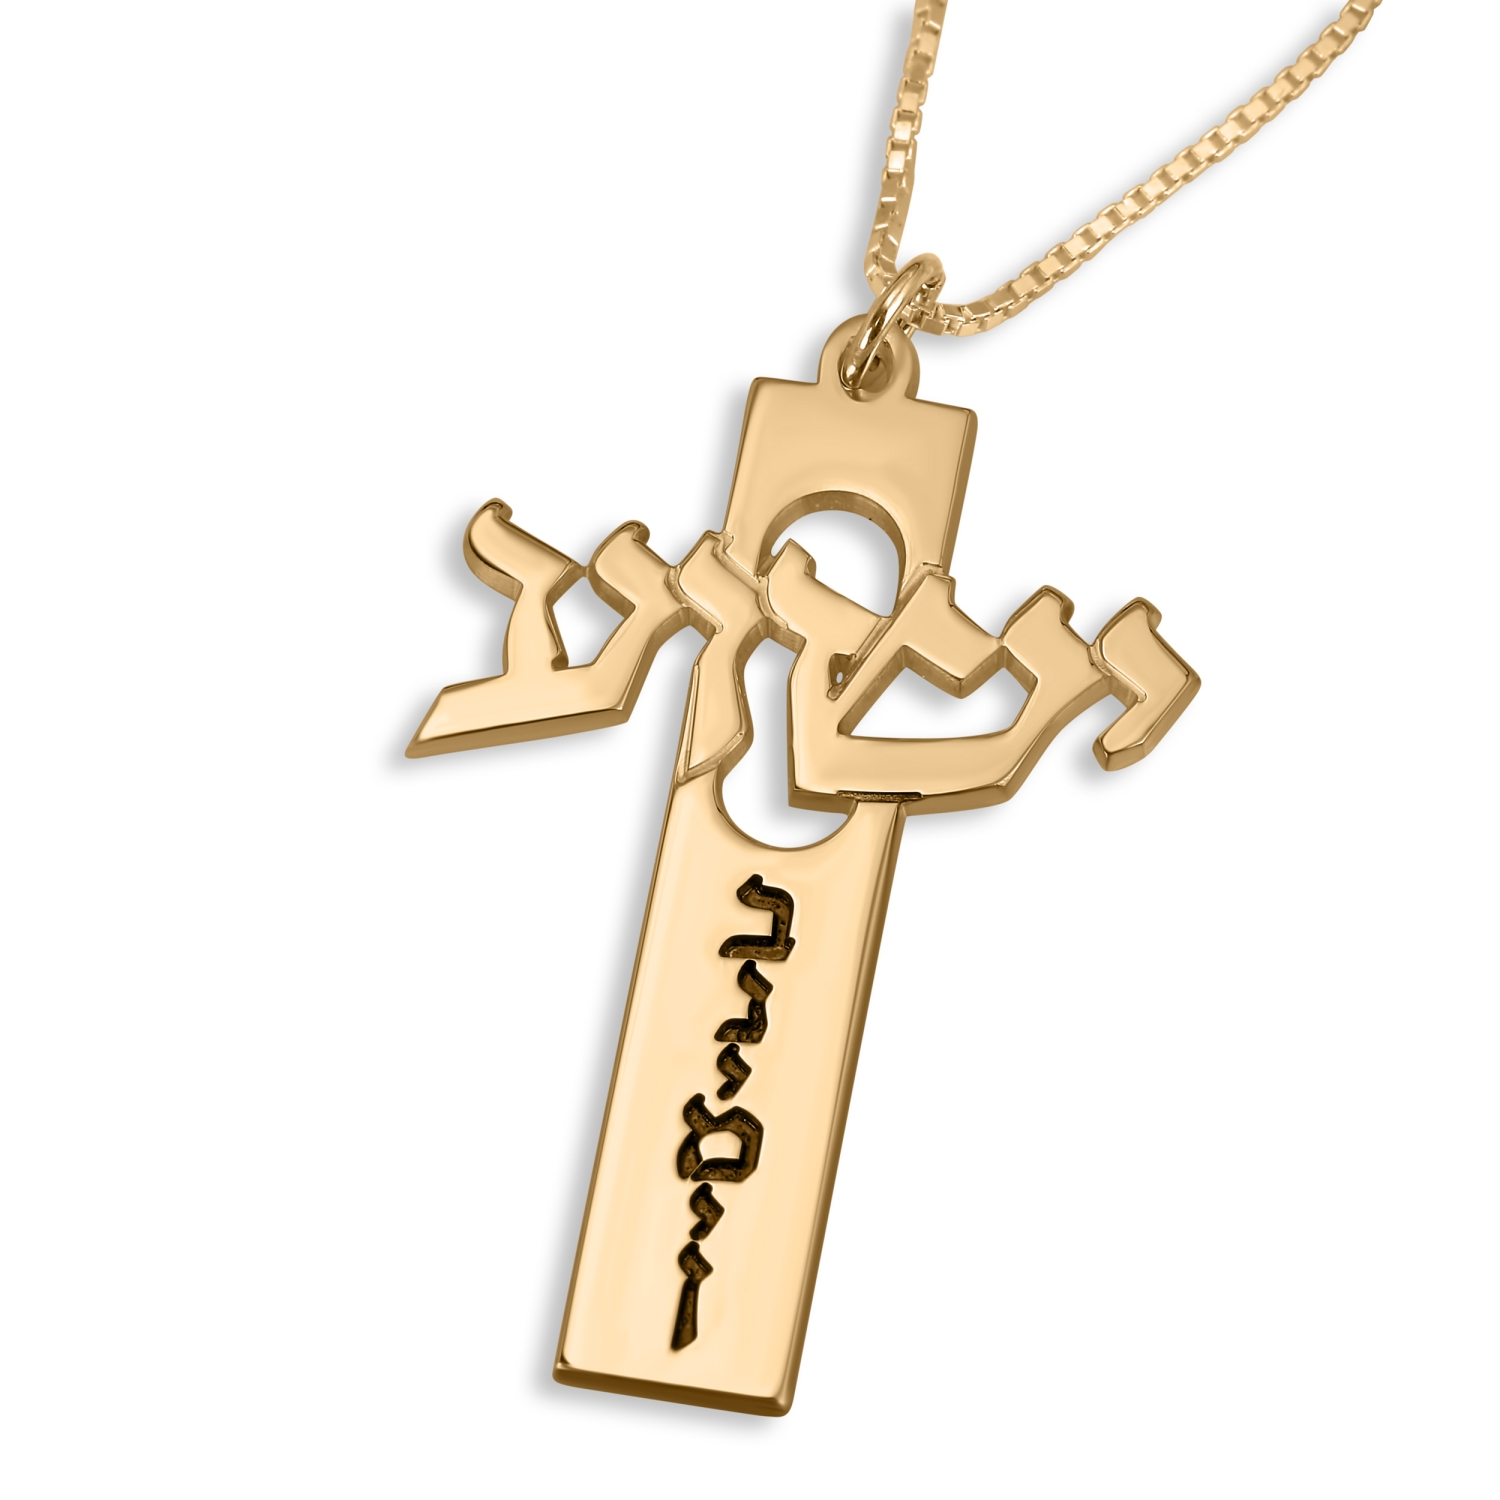 LIFETIME JEWELRY INRI Crucifix 24k Gold Plated Cross Necklace for Women and  Men | Amazon.com